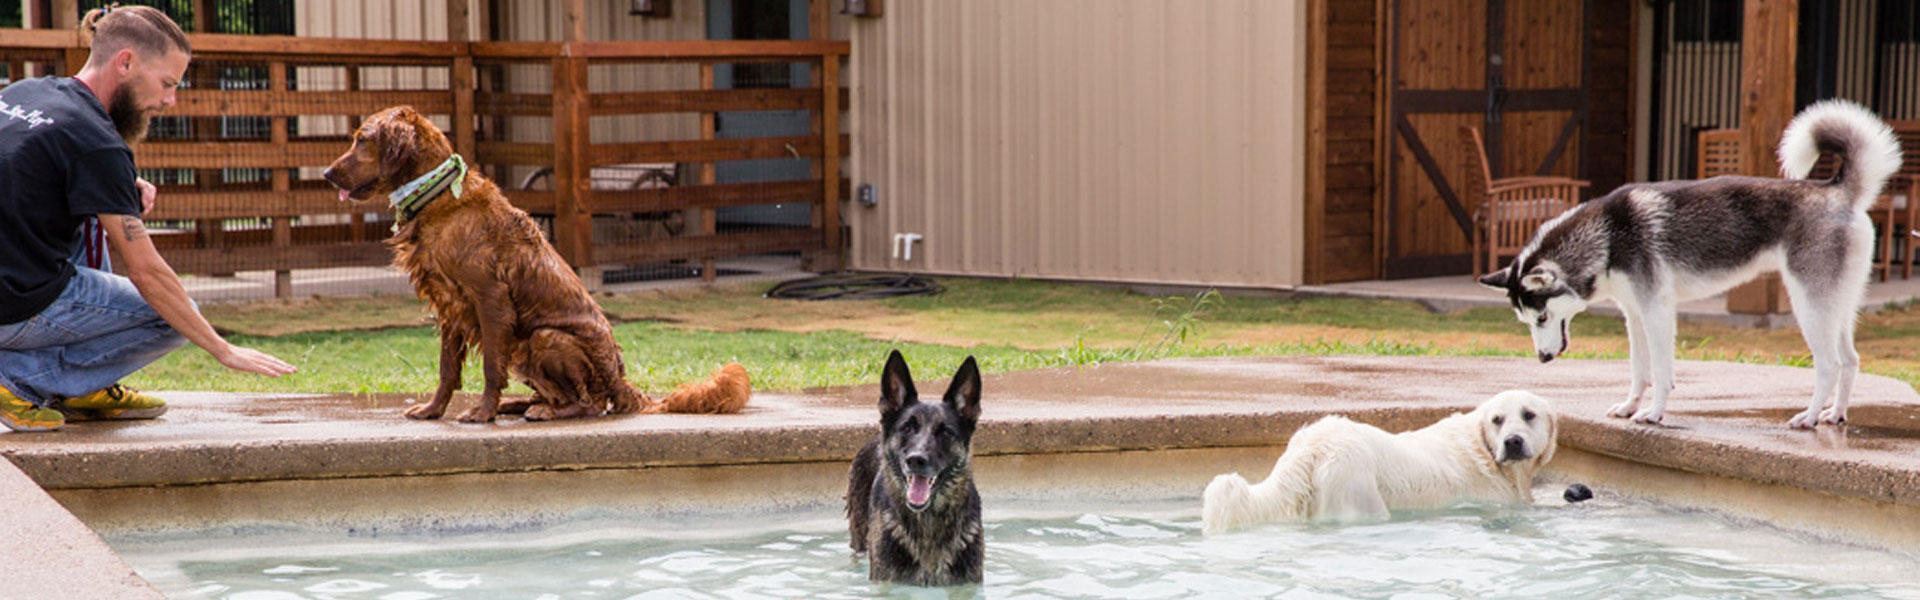 Dog Boarding & Grooming Resort in Dallas TX by Tailwaggers Country Inn